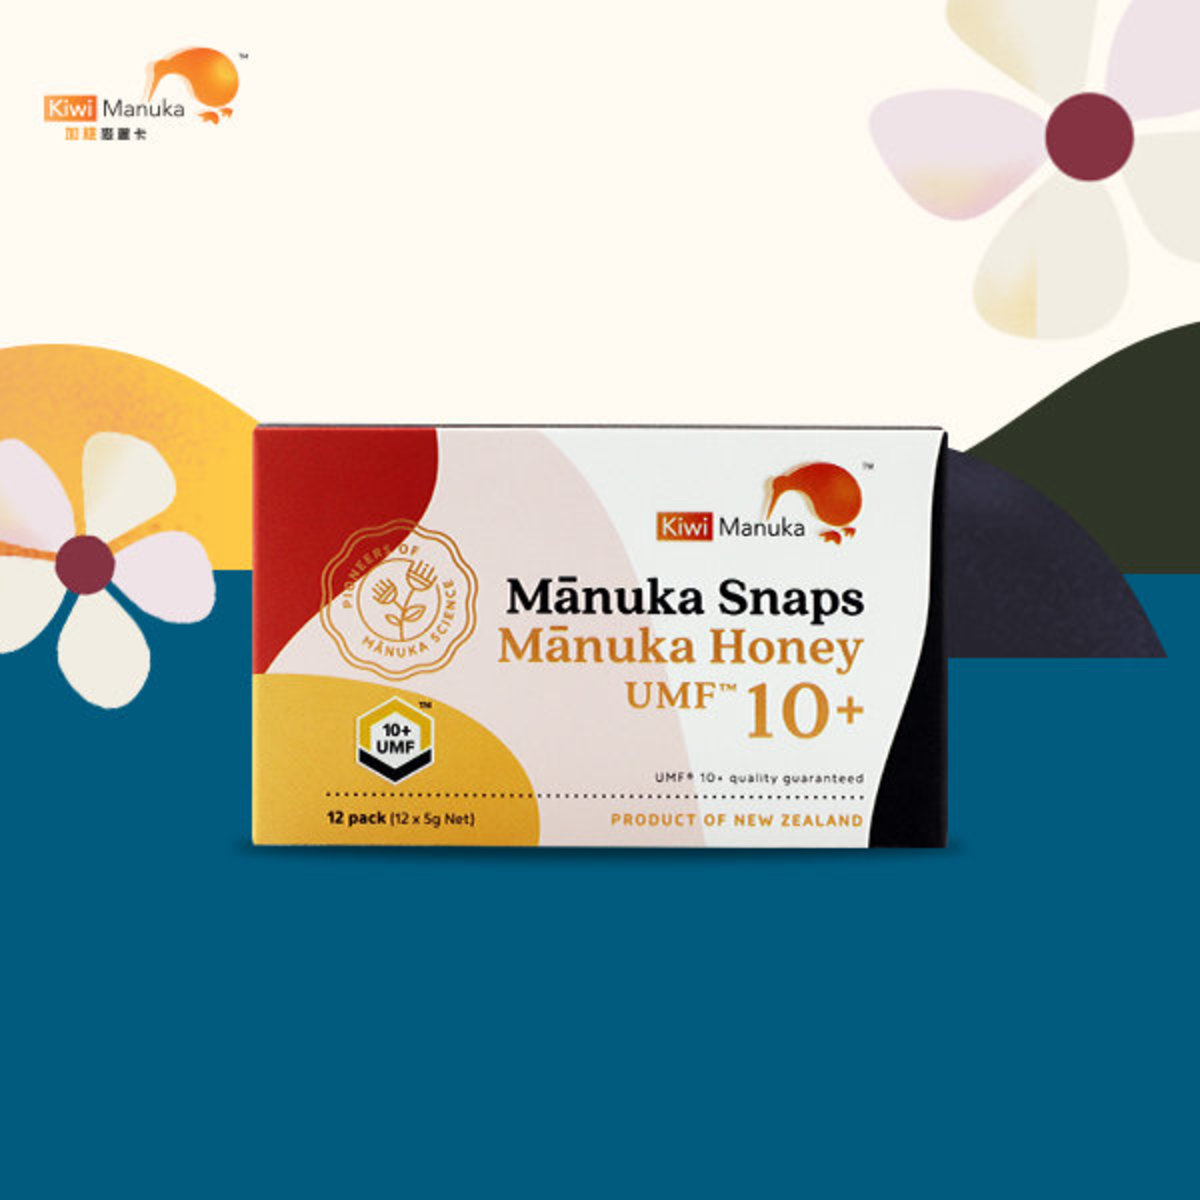 UMF 10+ / 263+ MGO SNAP PACKS - Travel (60g) <New Packaging> (9421902742996)